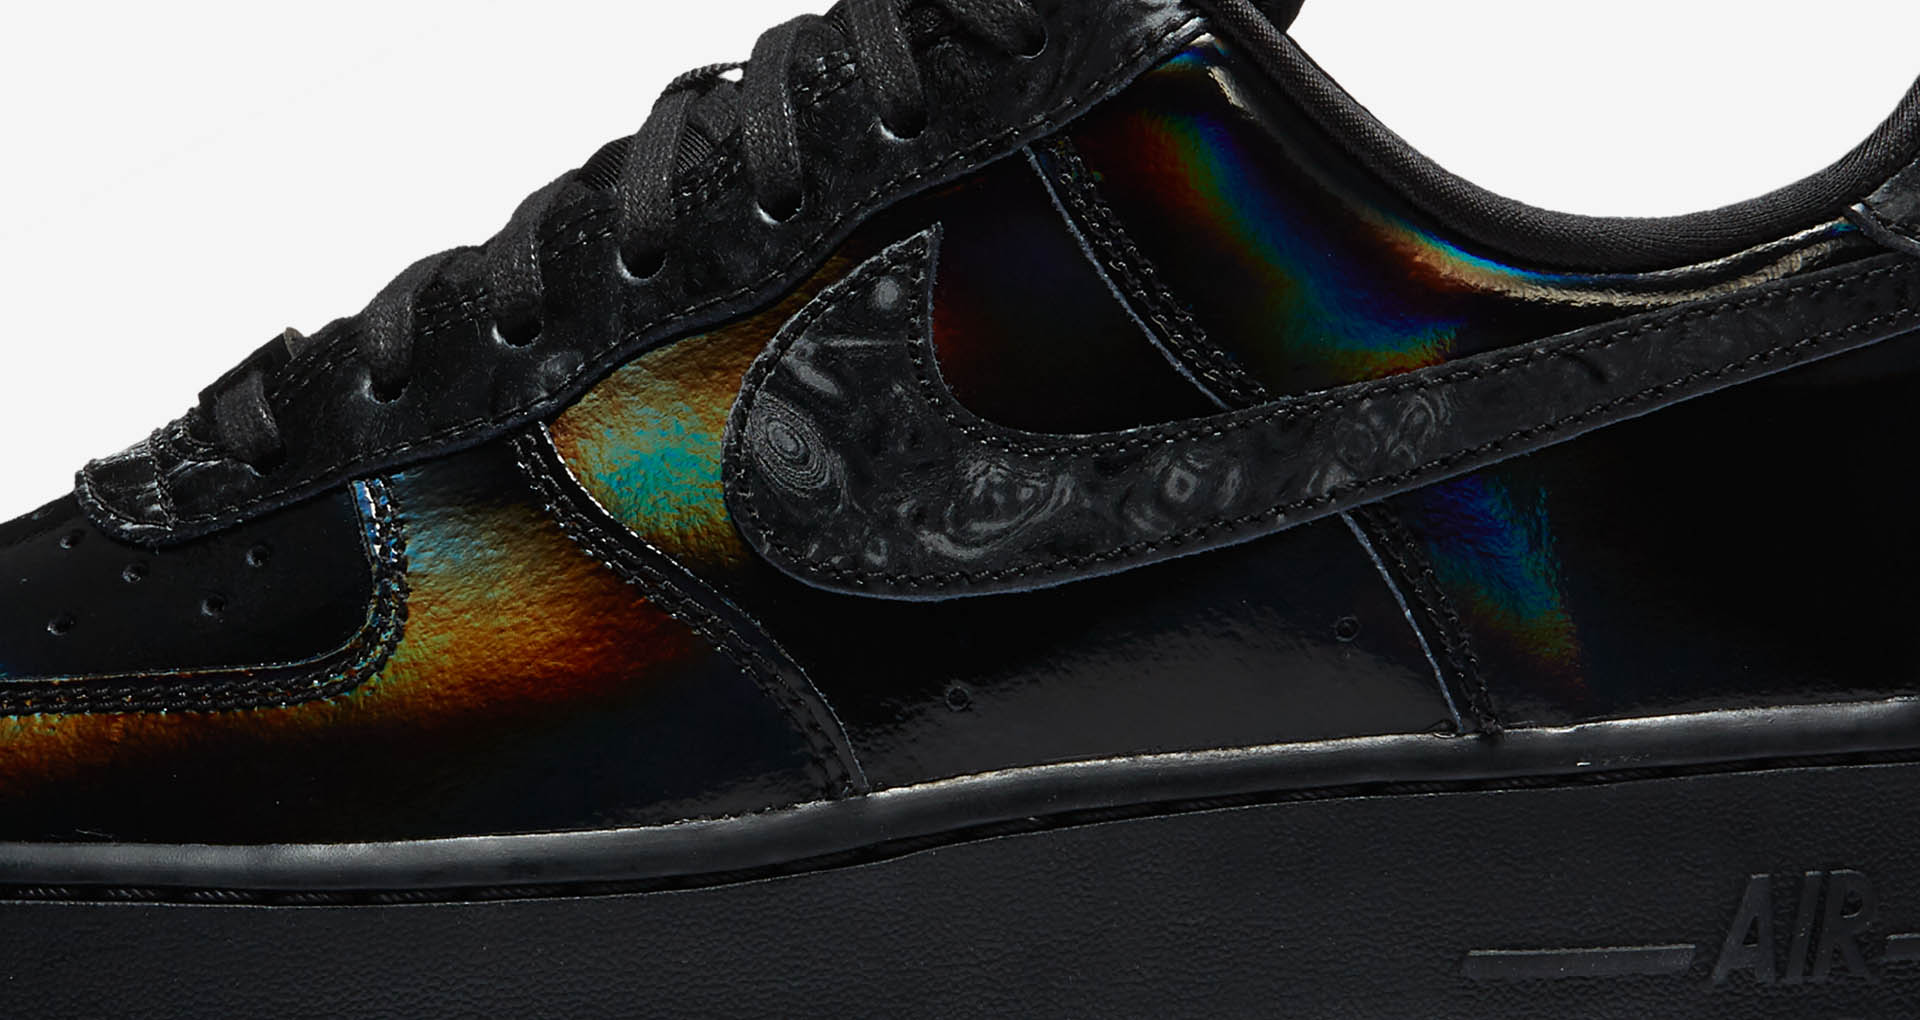 08-nike-womens-air-force-1-low-luxe-iridescent-pack-black-898889-009